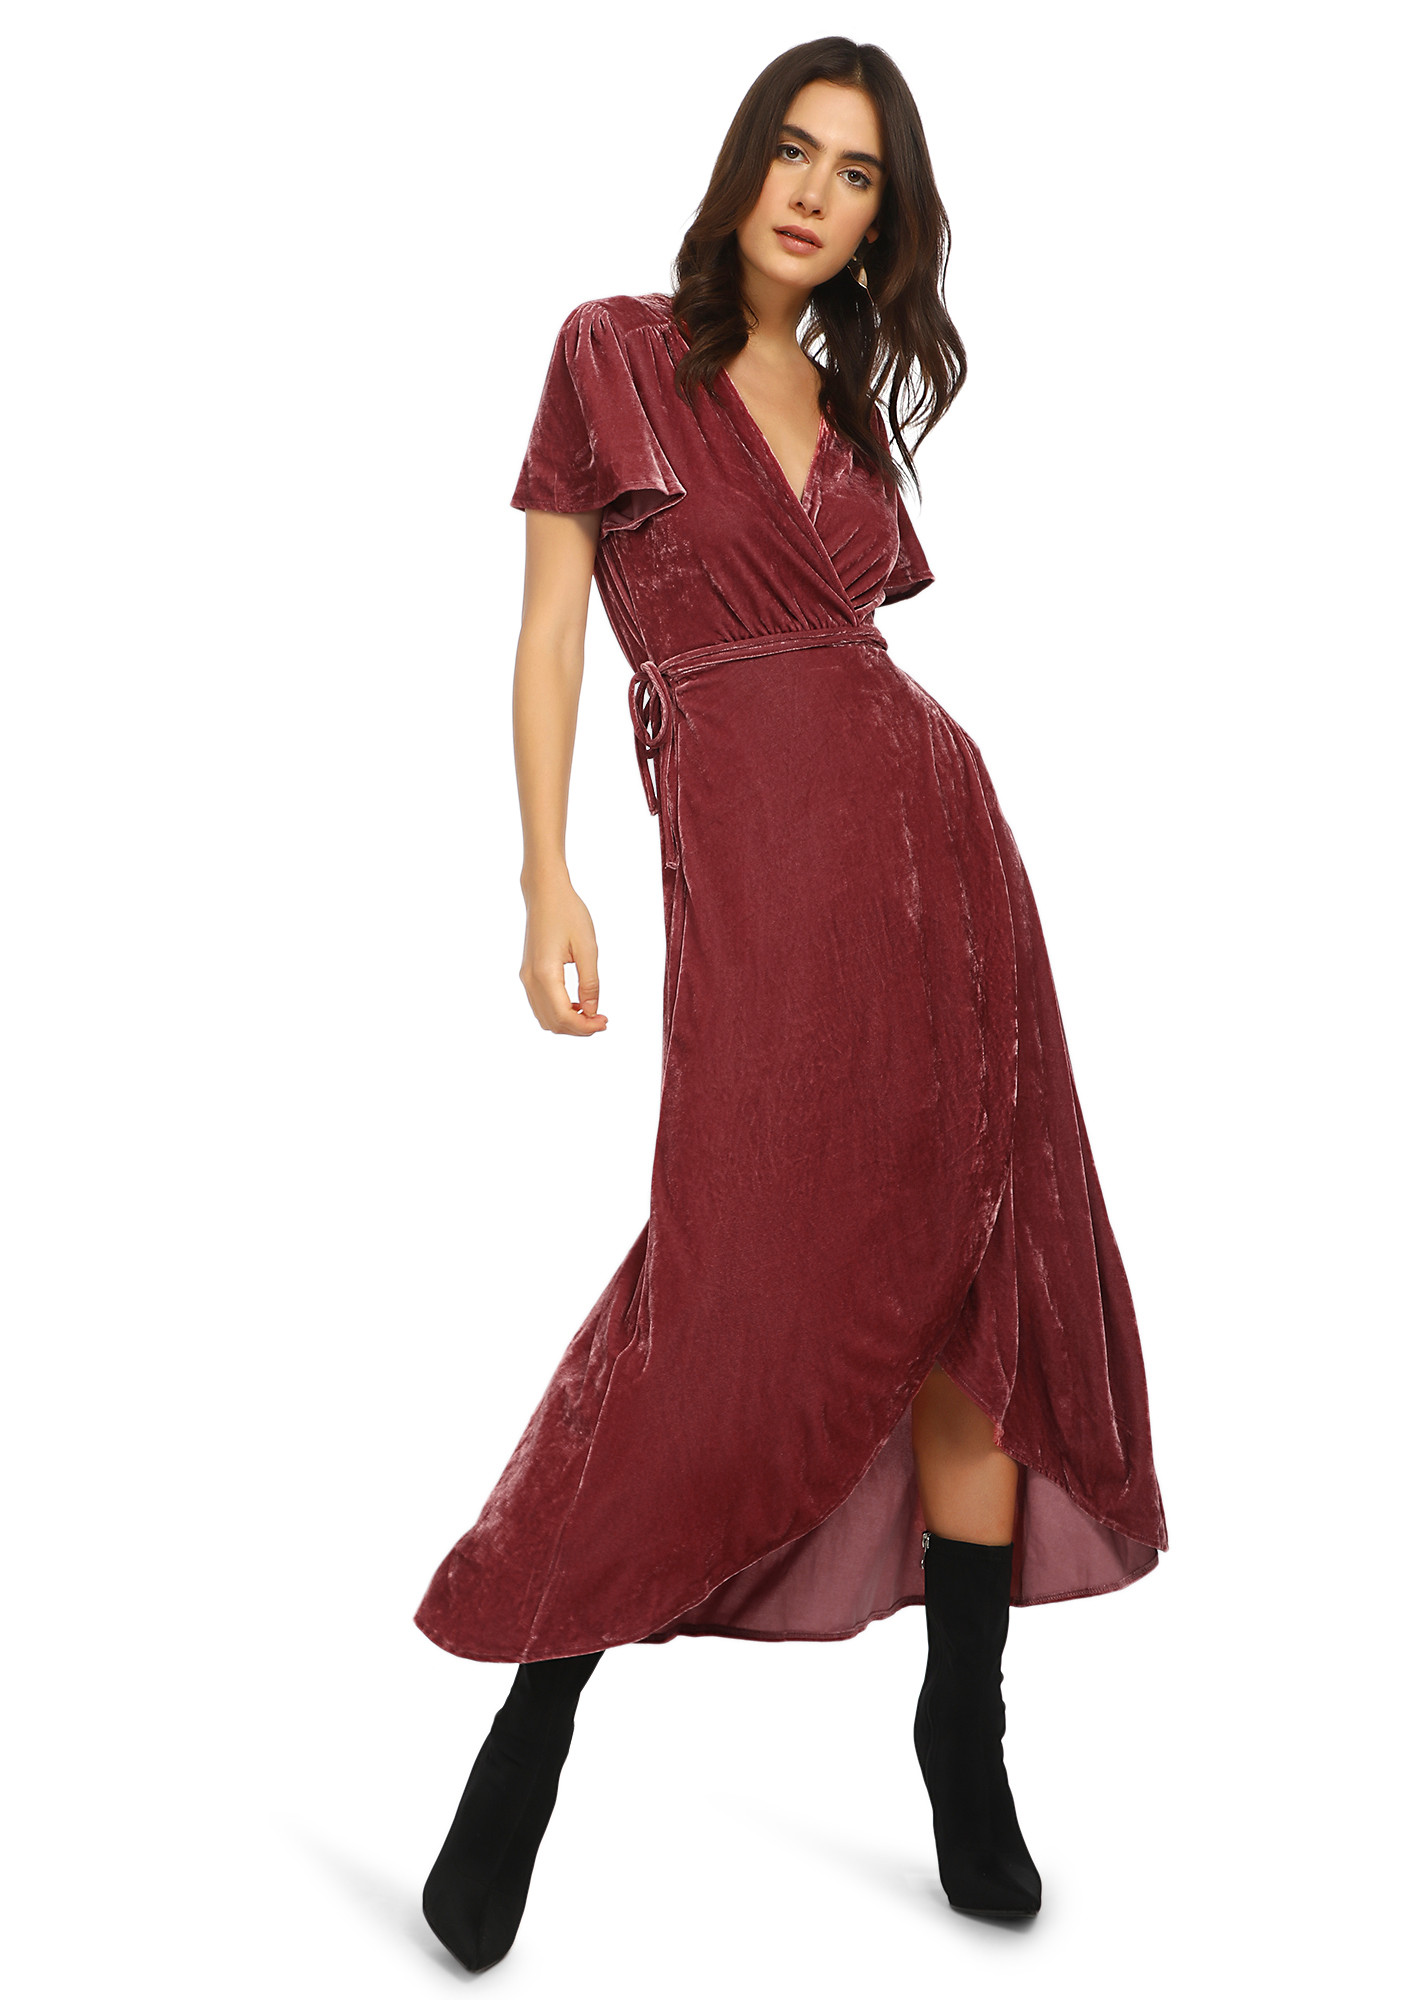 UNDER A LUXE WRAP BRICK RED MAXI DRESS